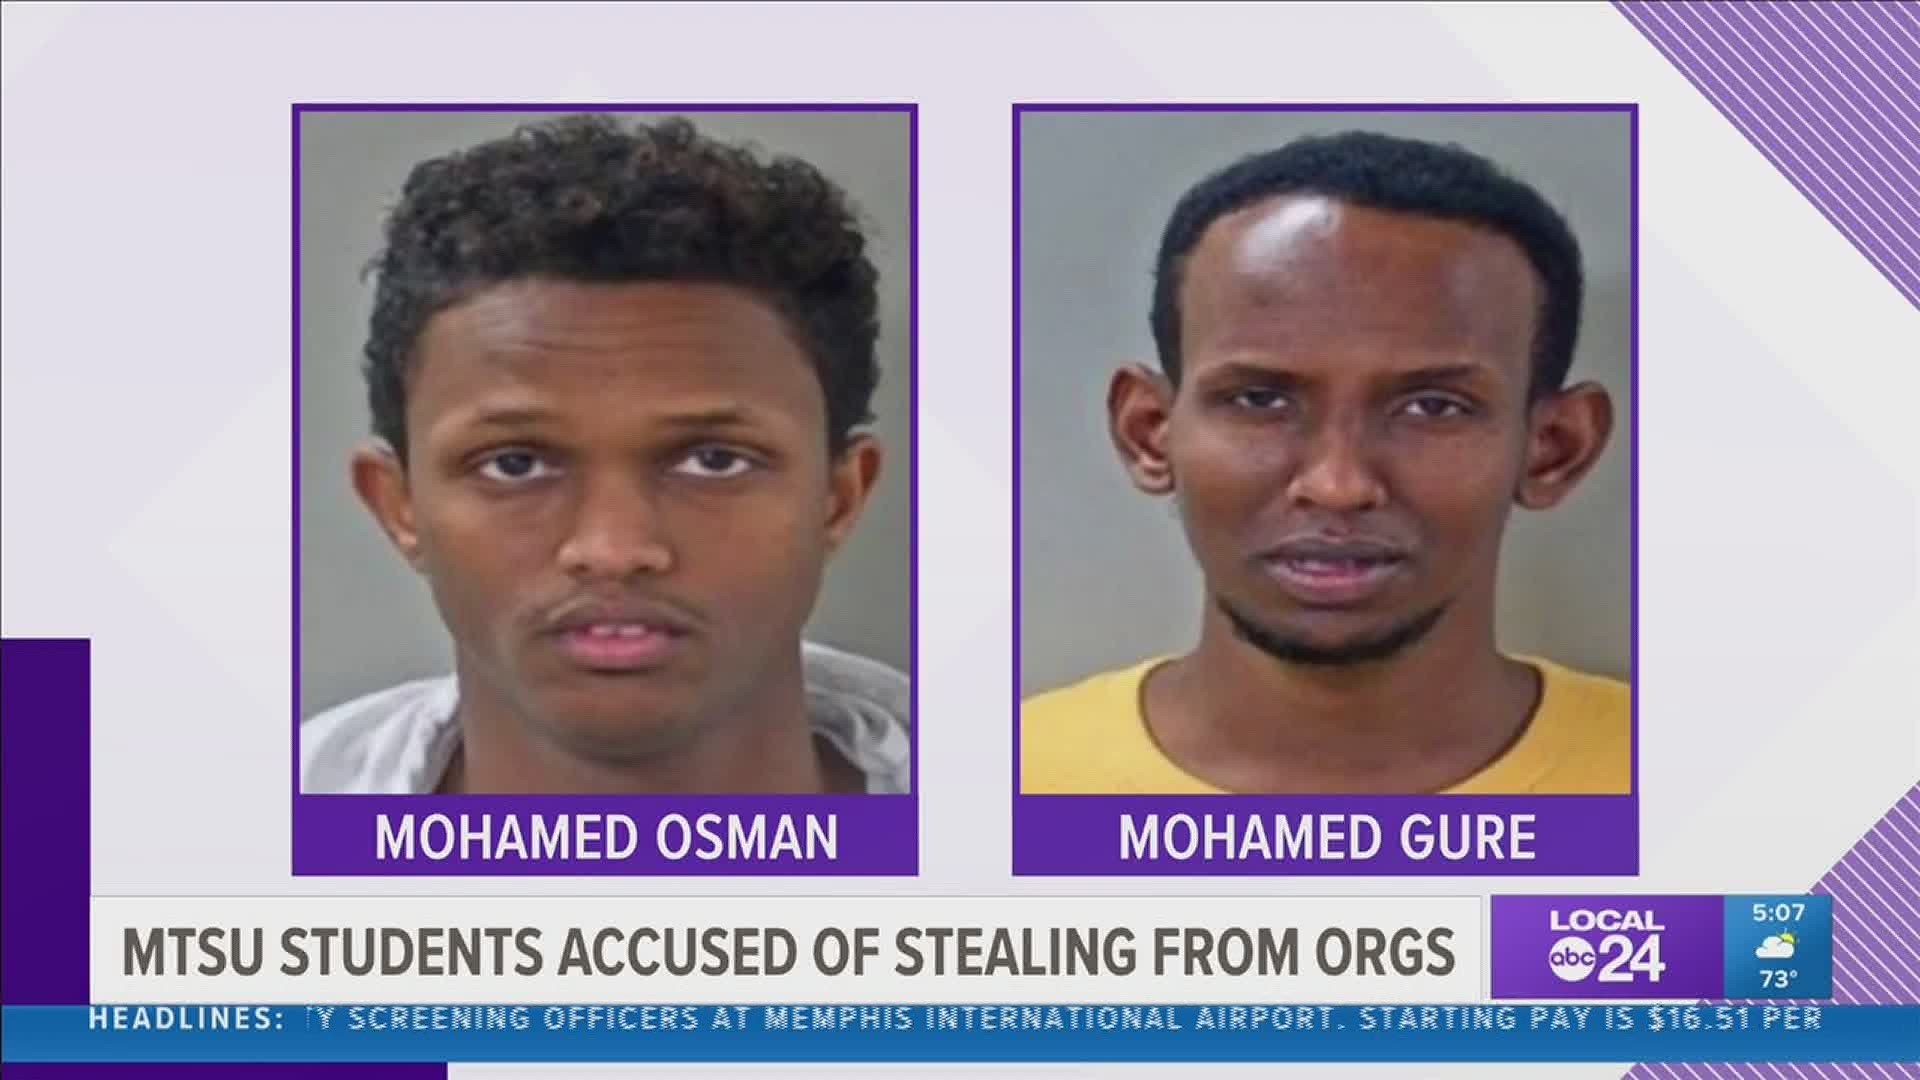 Mohamed Gure and Mohamed Osman are both charged with stealing money using the school's Somali & Muslim Student Associations.